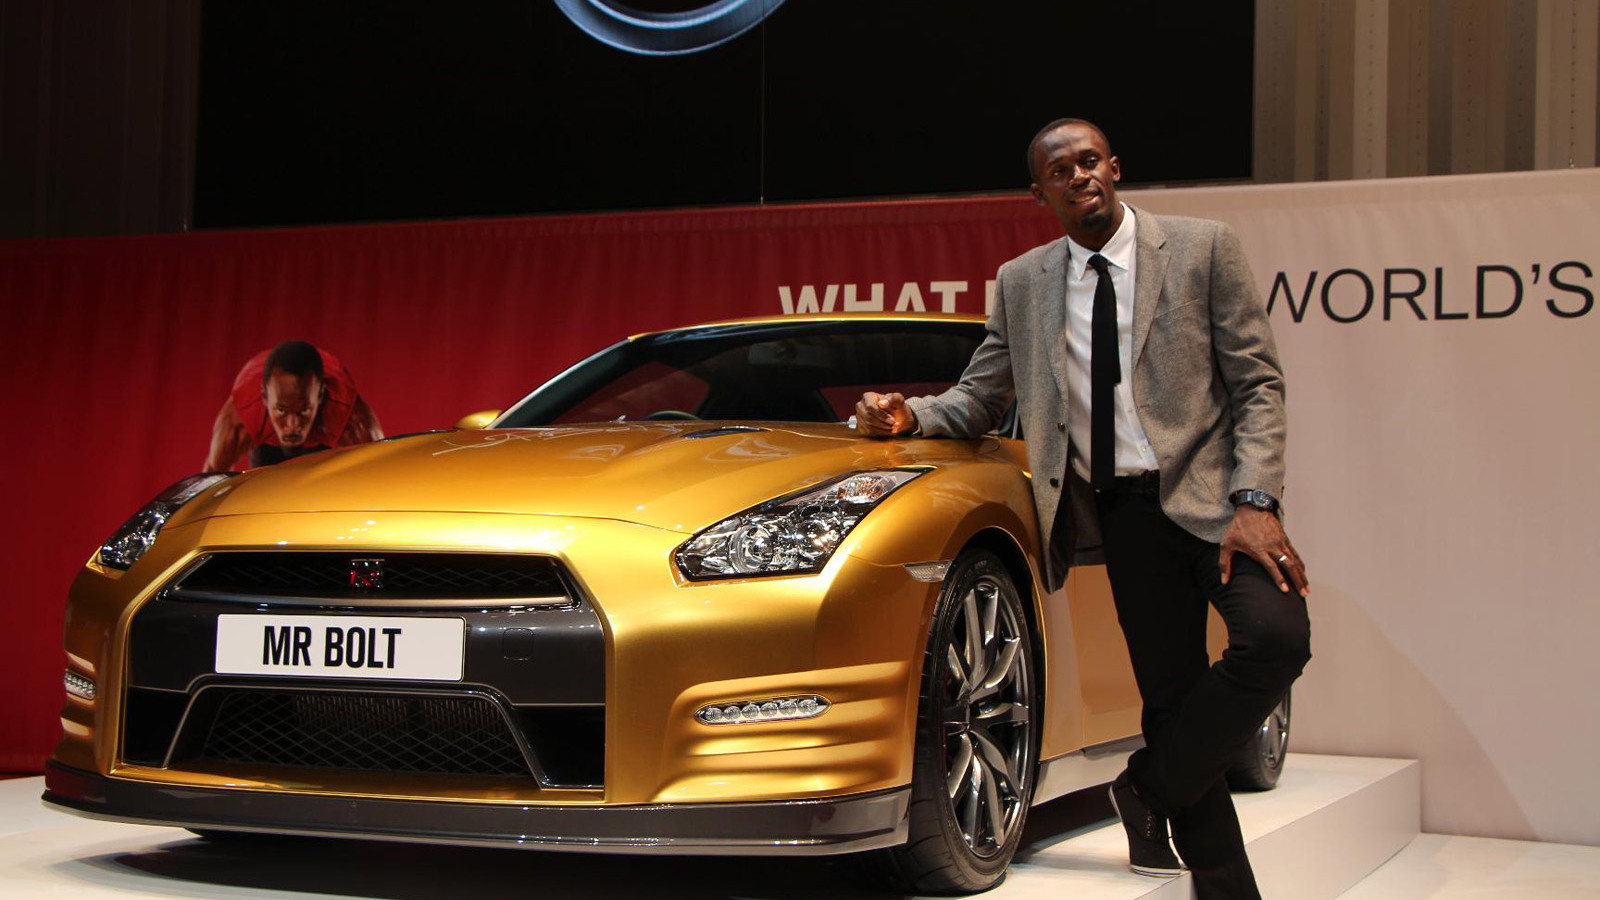 Usain Bolt and his personal gold Nissan GT-R